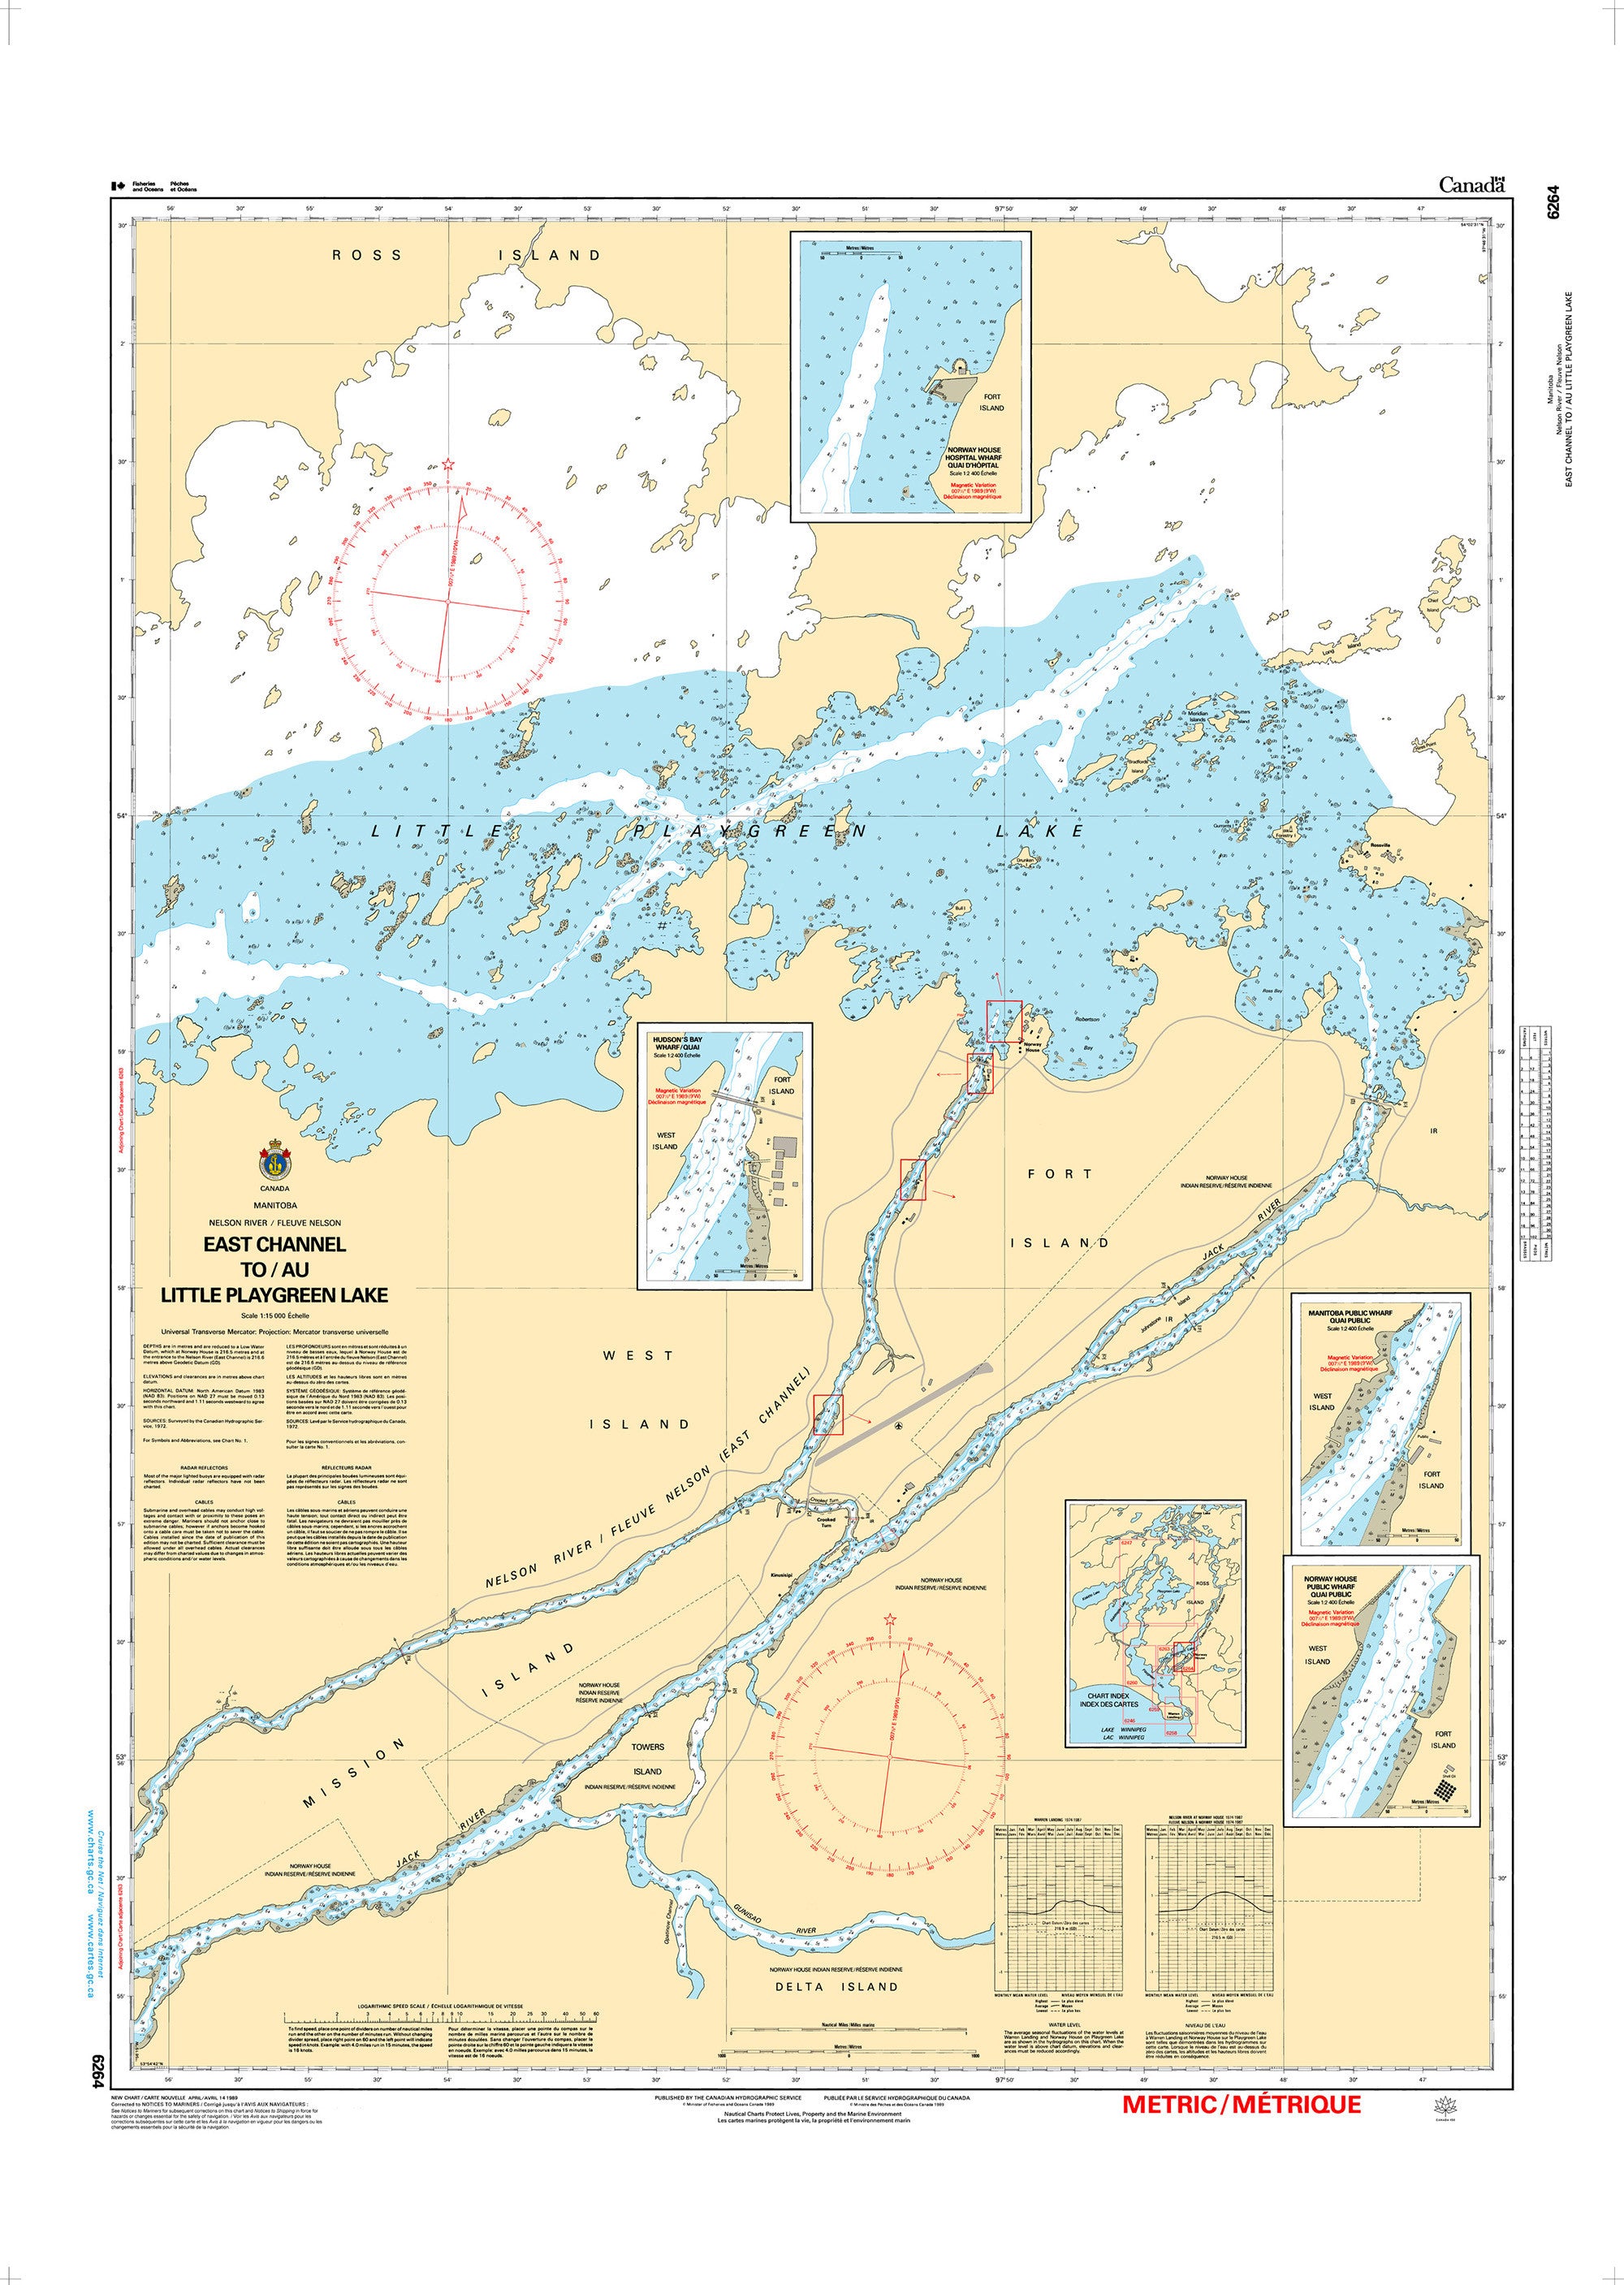 Canadian Hydrographic Service Nautical Chart CHS6264: East Channel to/au Little Playgreen Lake